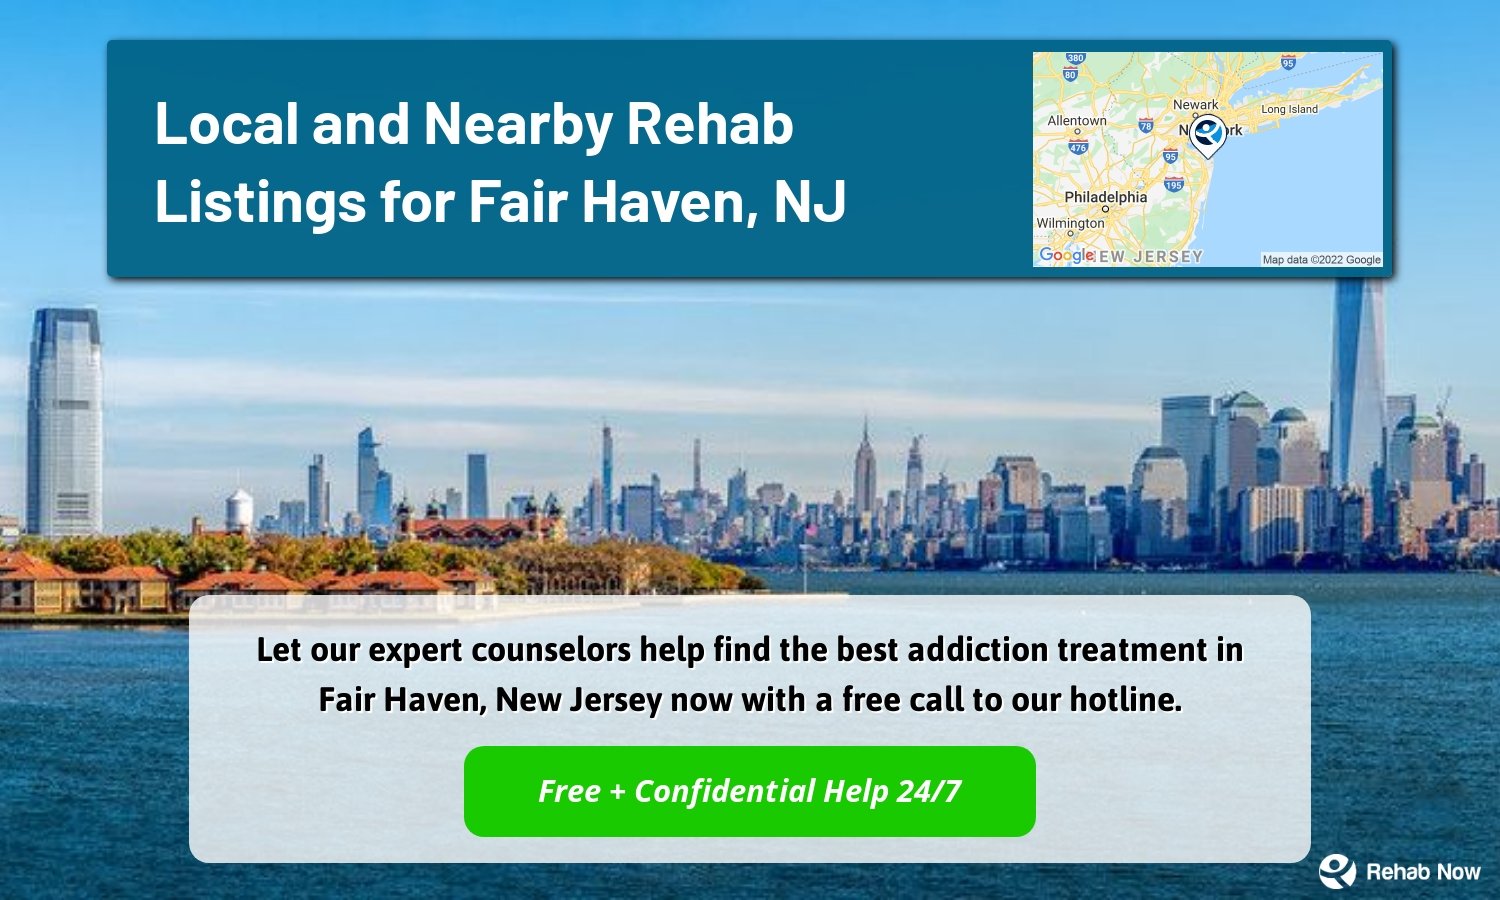 Let our expert counselors help find the best addiction treatment in Fair Haven, New Jersey now with a free call to our hotline.